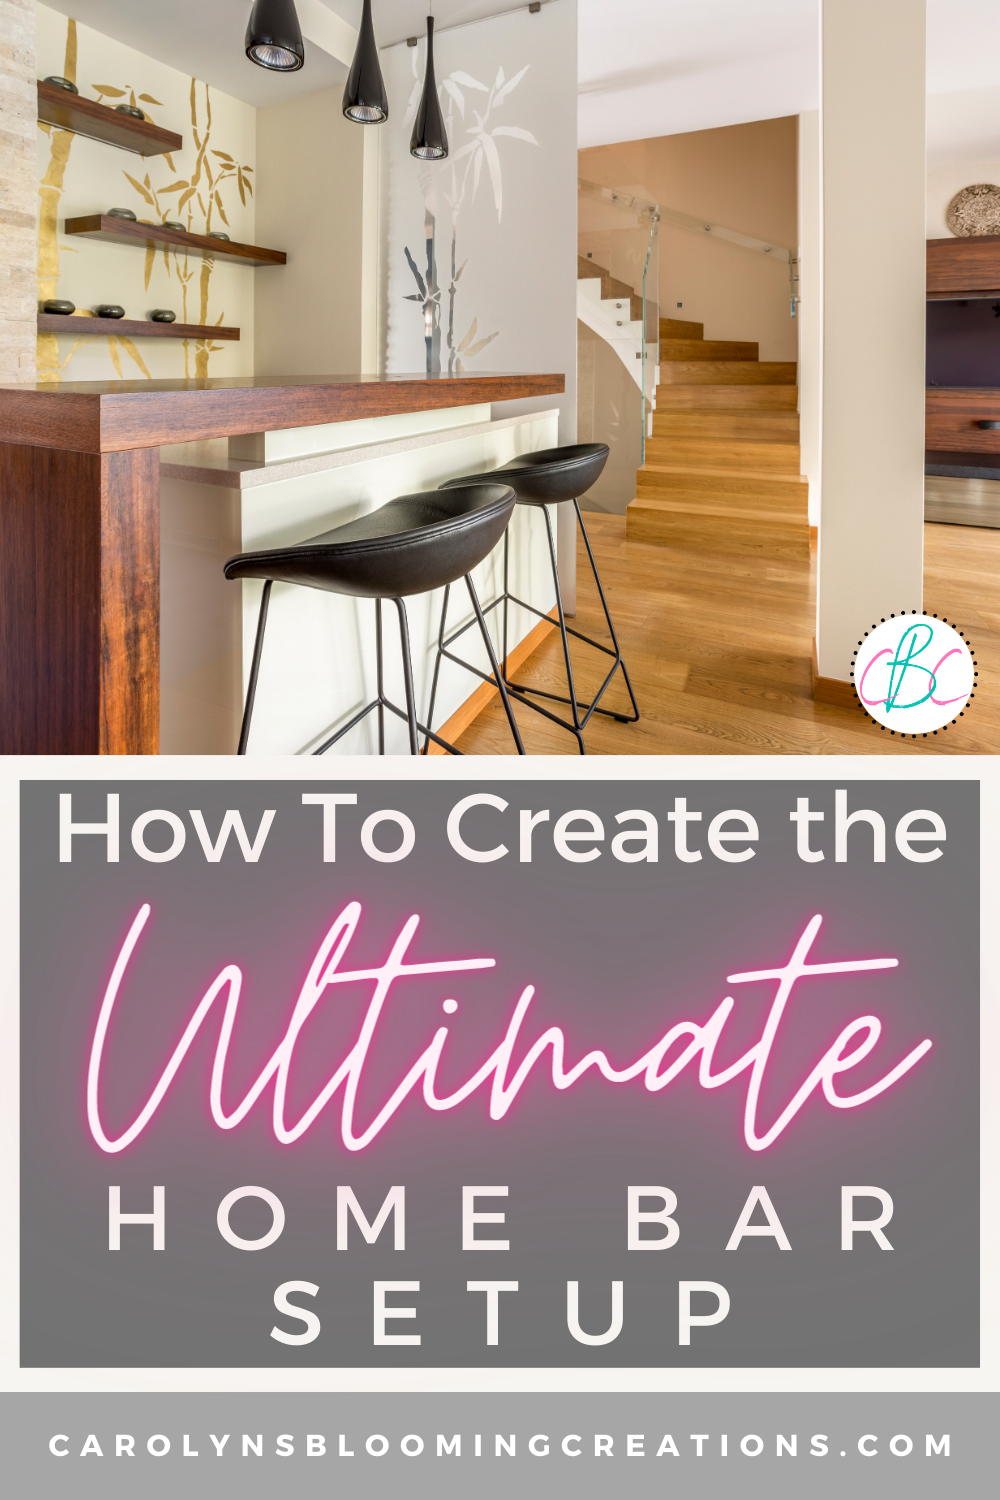 😎How To Build A Bar For Your House🌟 #diy @co-know